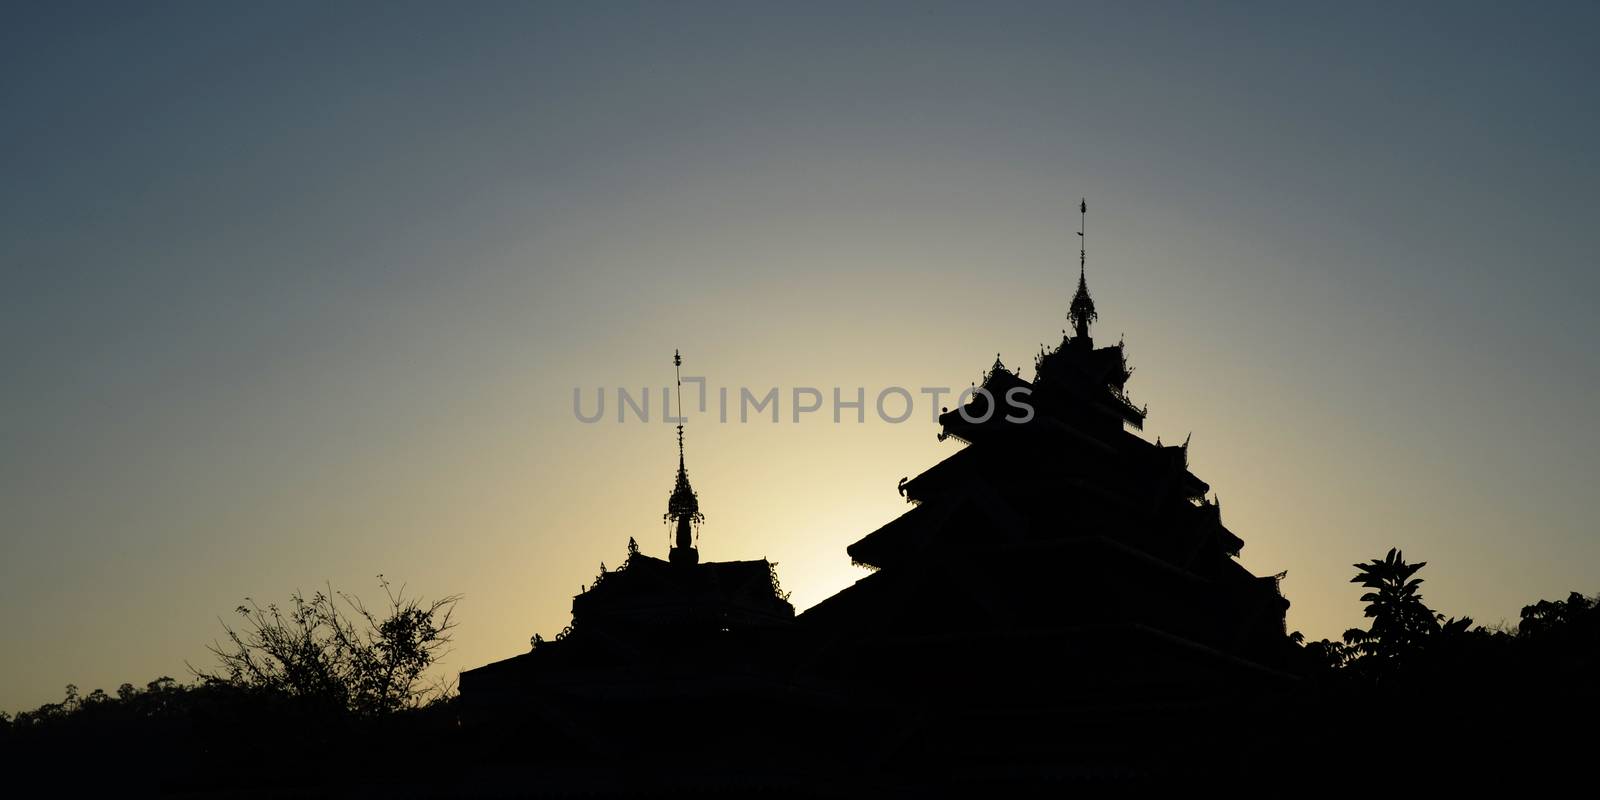 A Architecture of Wat Tai Yai's Buddhist Temple in the Evening